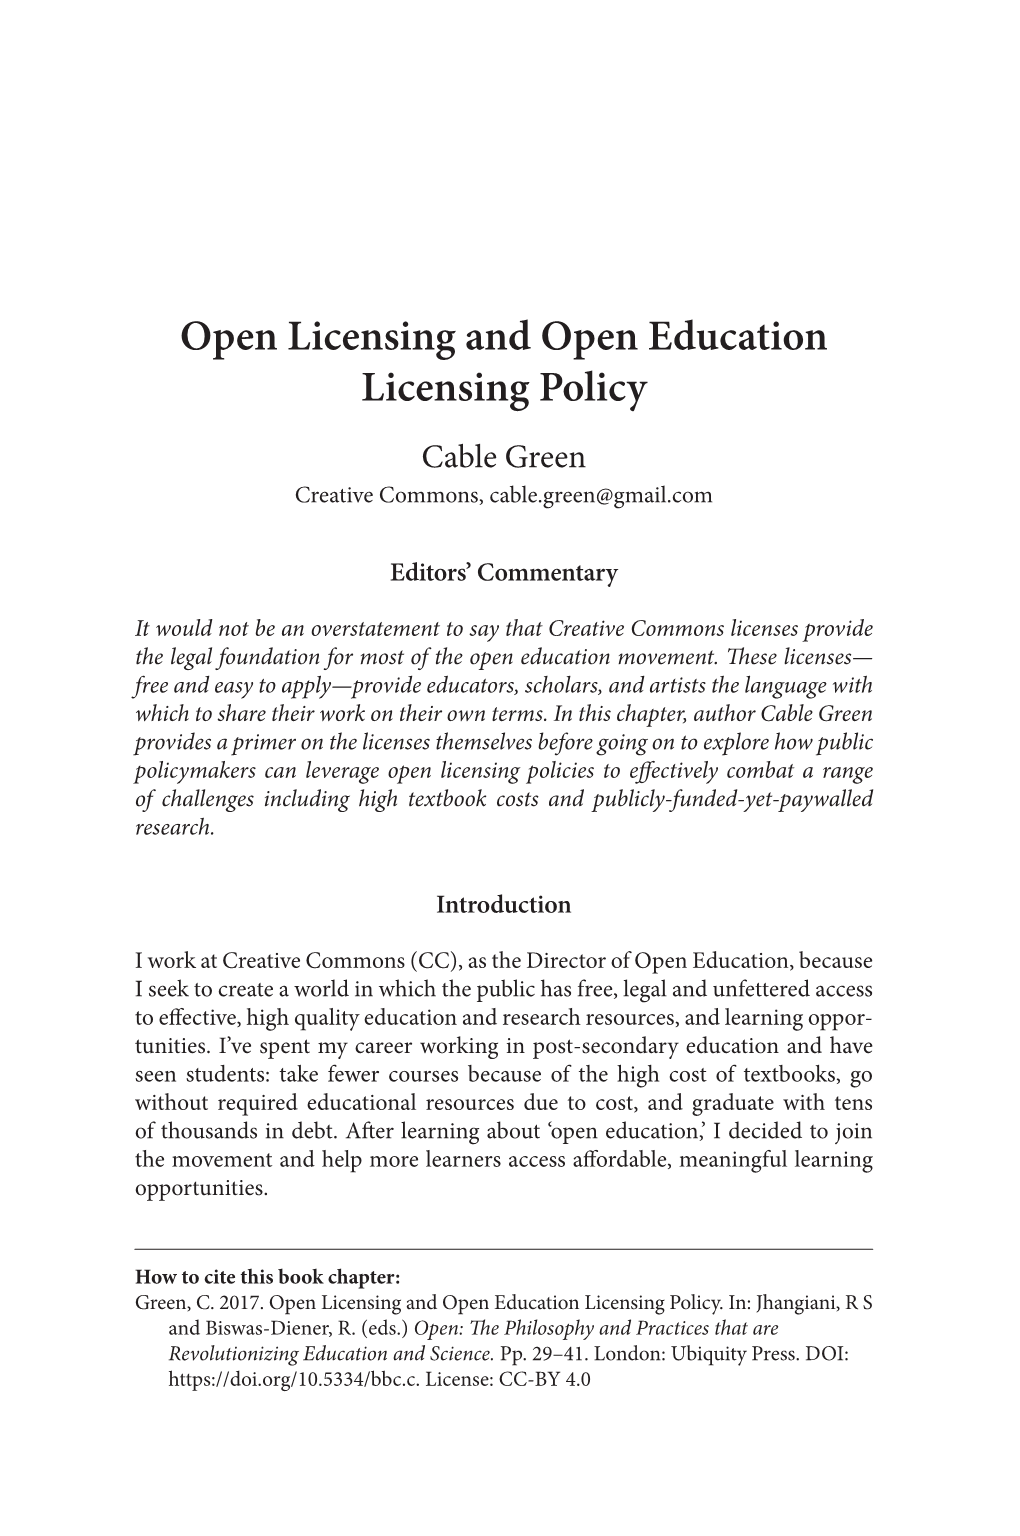 Open Licensing and Open Education Licensing Policy Cable Green Creative Commons, Cable.Green@Gmail.Com